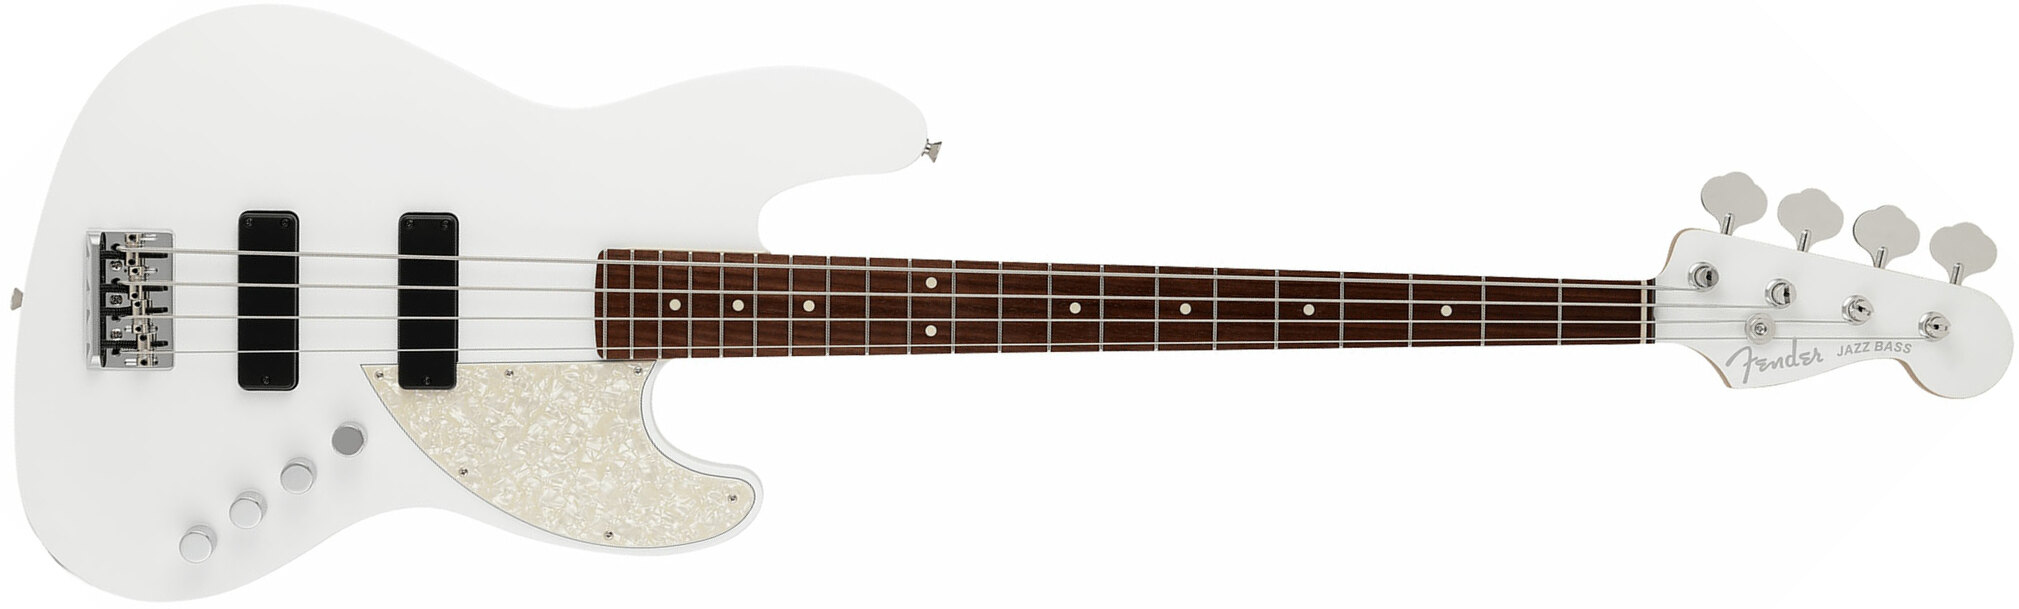 Fender Jazz Bass Elemental Mij Jap Active Rw - Nimbus White - Solid body electric bass - Main picture